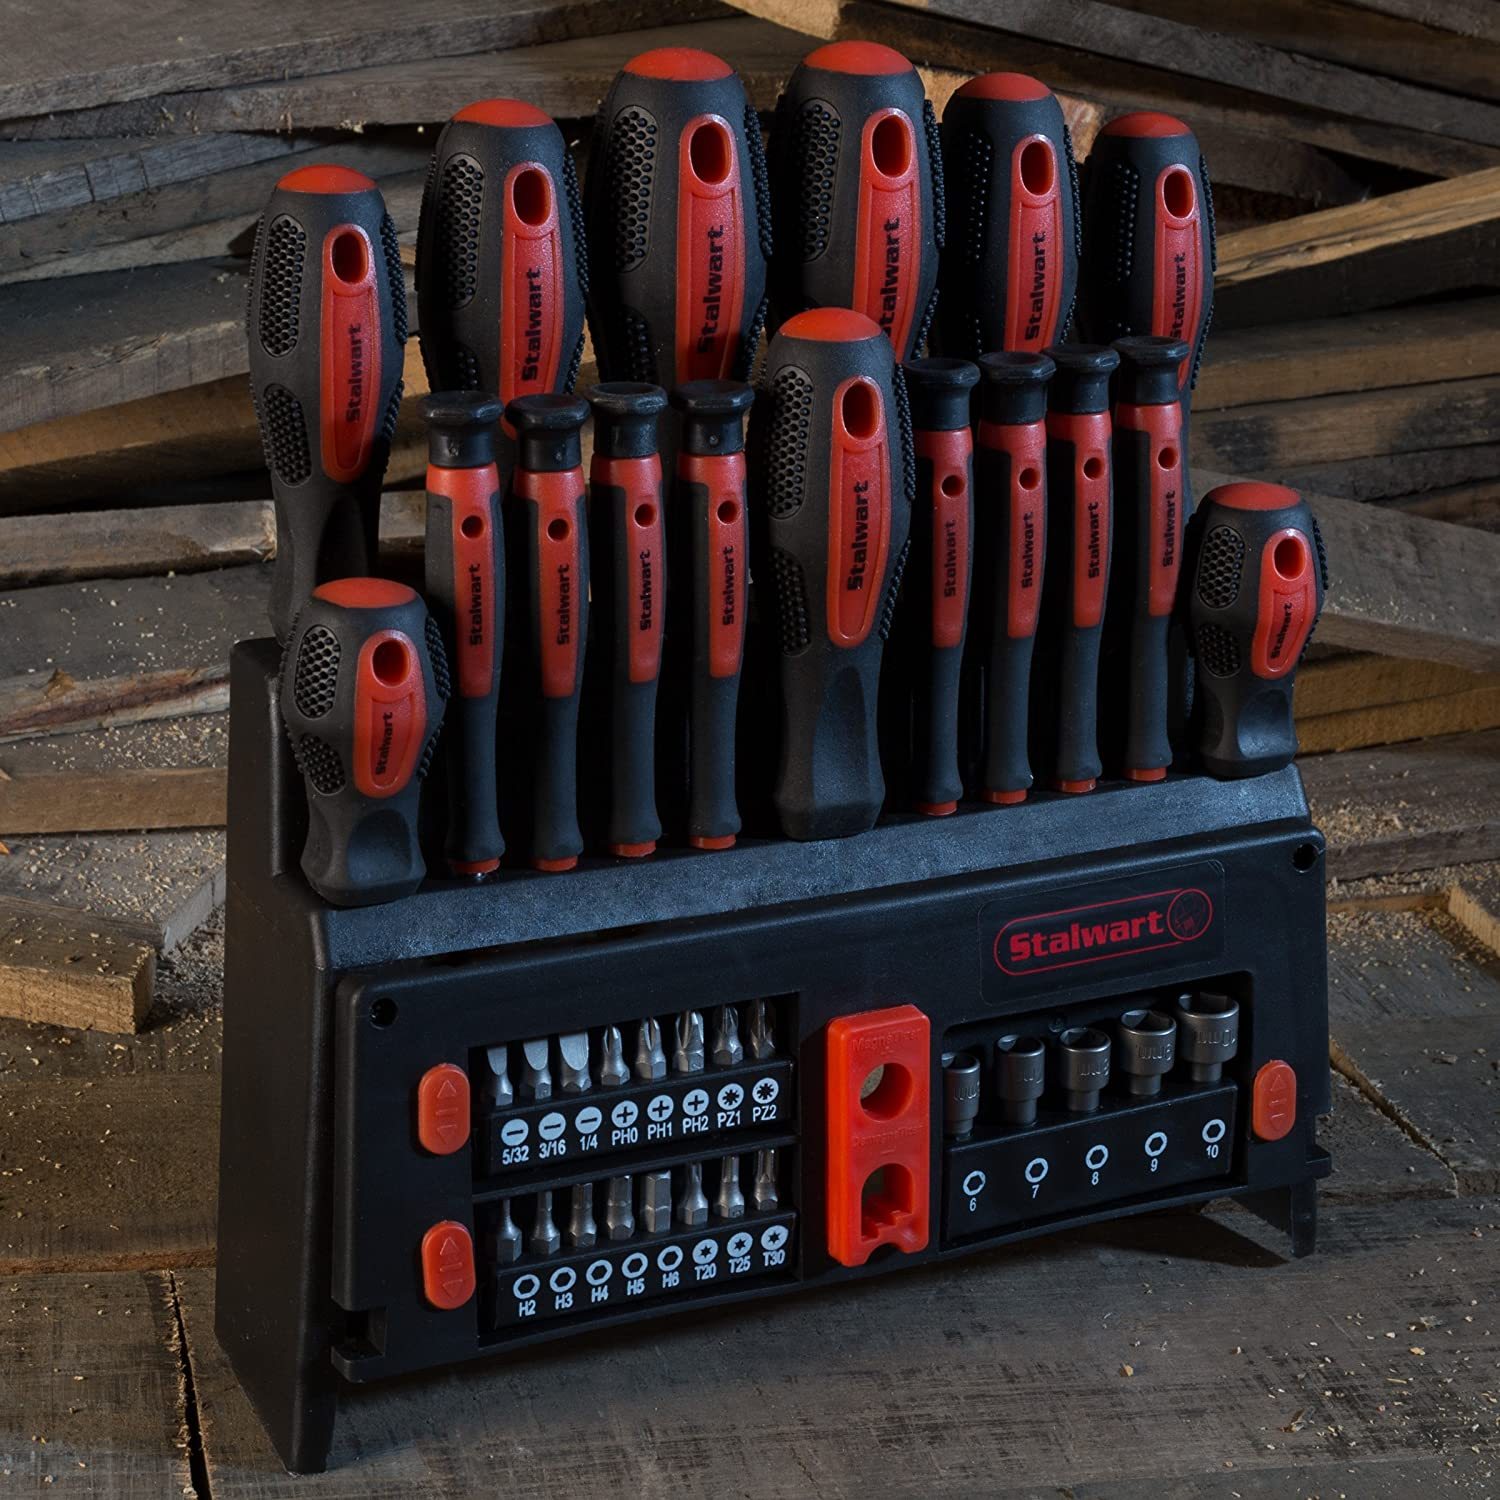 Stalwart - 75-Ht4089 39 Piece Screwdriver And Bit Set With Magnetic Tips- Precis - $37.04